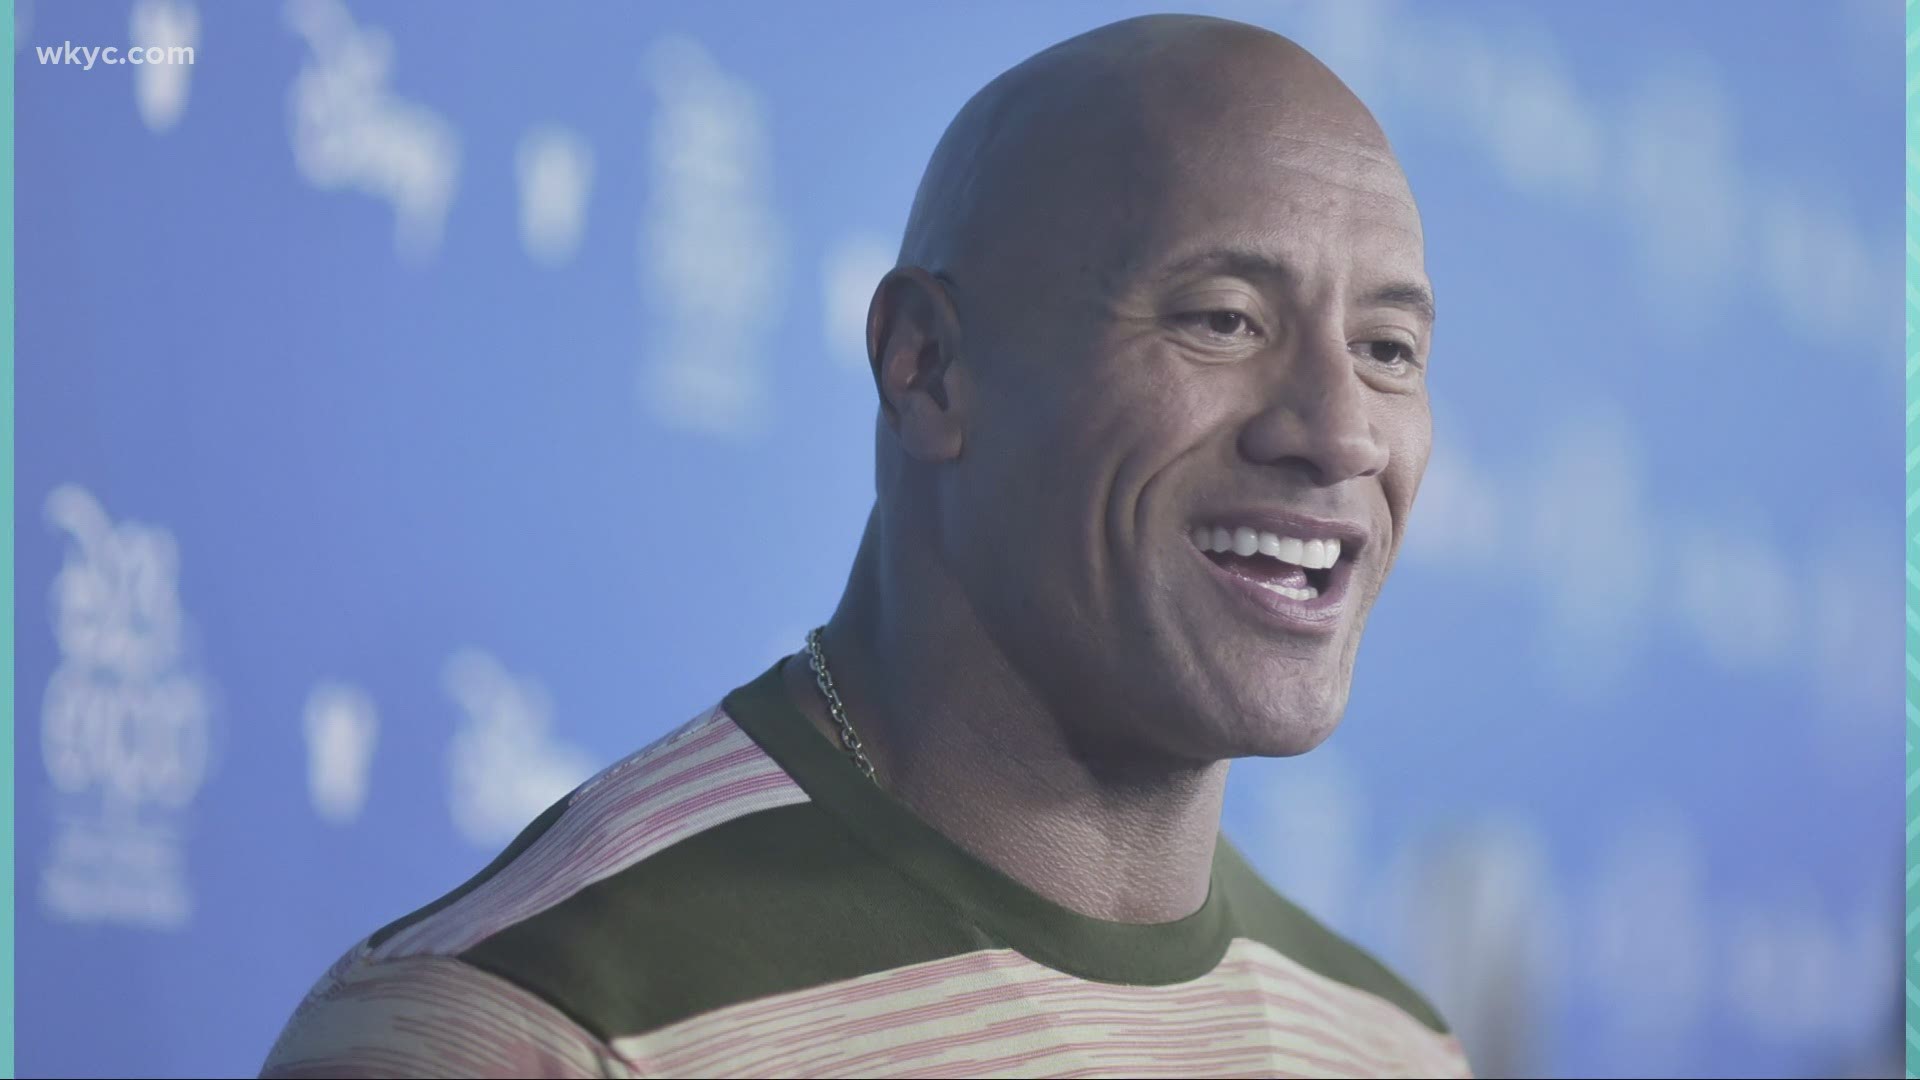 Dwayne "The Rock" Johnson says he is humbled by a new poll showing support for a possible presidential run. Plus, all the details on the "Shameless" finale.